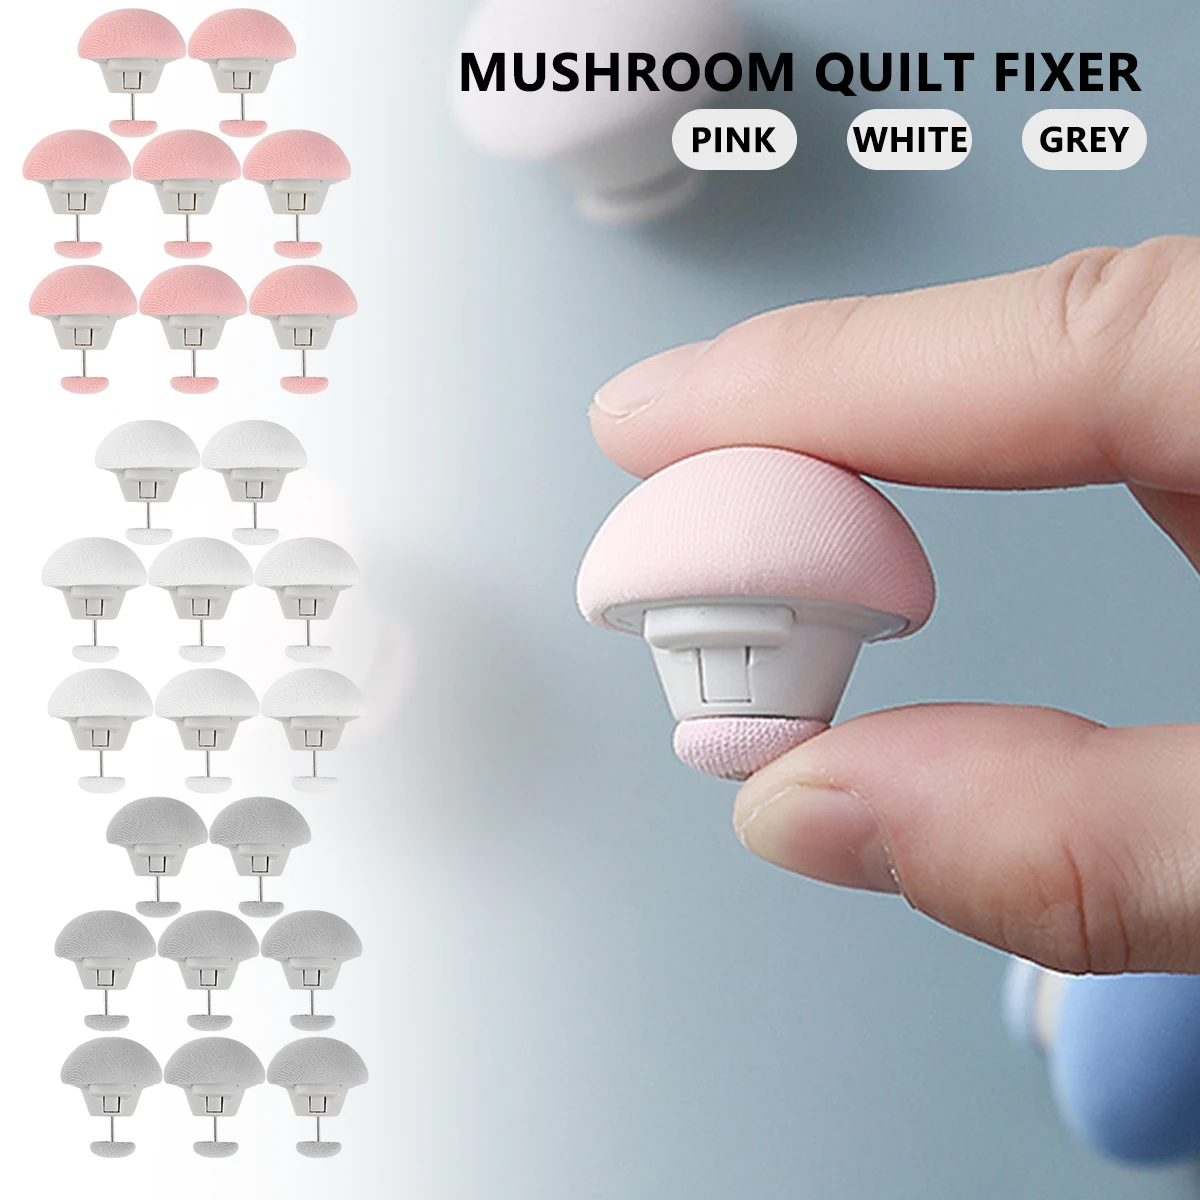 Grey MQUPIN Quilt Fixing Clips,16 Pcs Duvet Cover Clips,Mushroom Round Fixing Clips with Buttons,Bedroom Duvet Fixing Holder Quilt Cover Pins with Box 